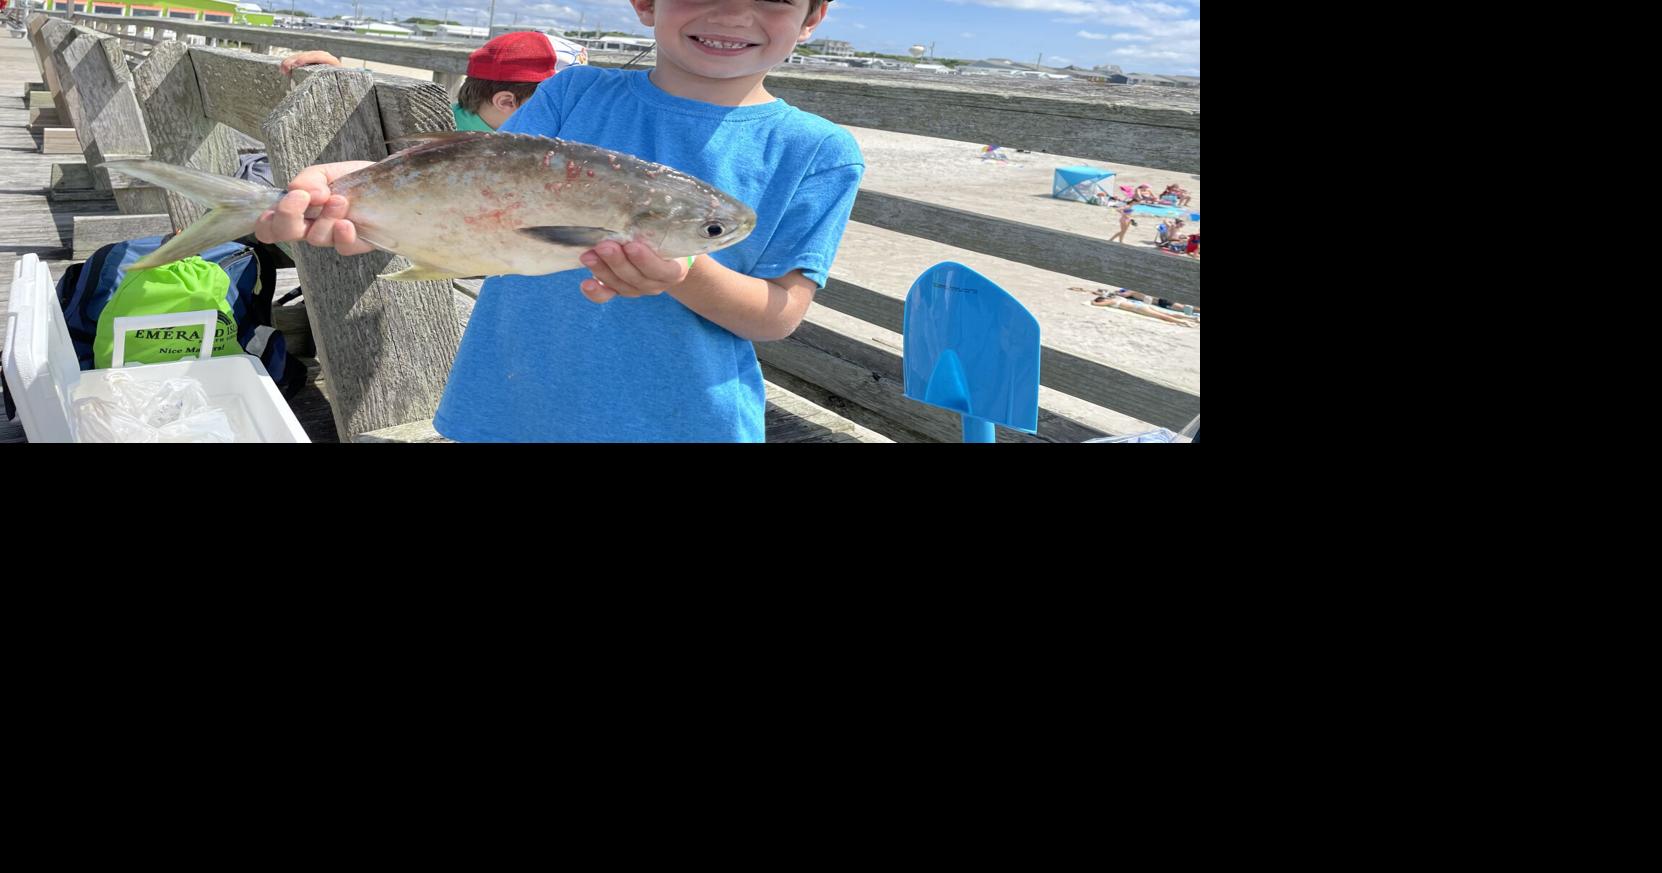 Reel fun: Youth Fishing Derby held at Bogue Inlet Pier | News